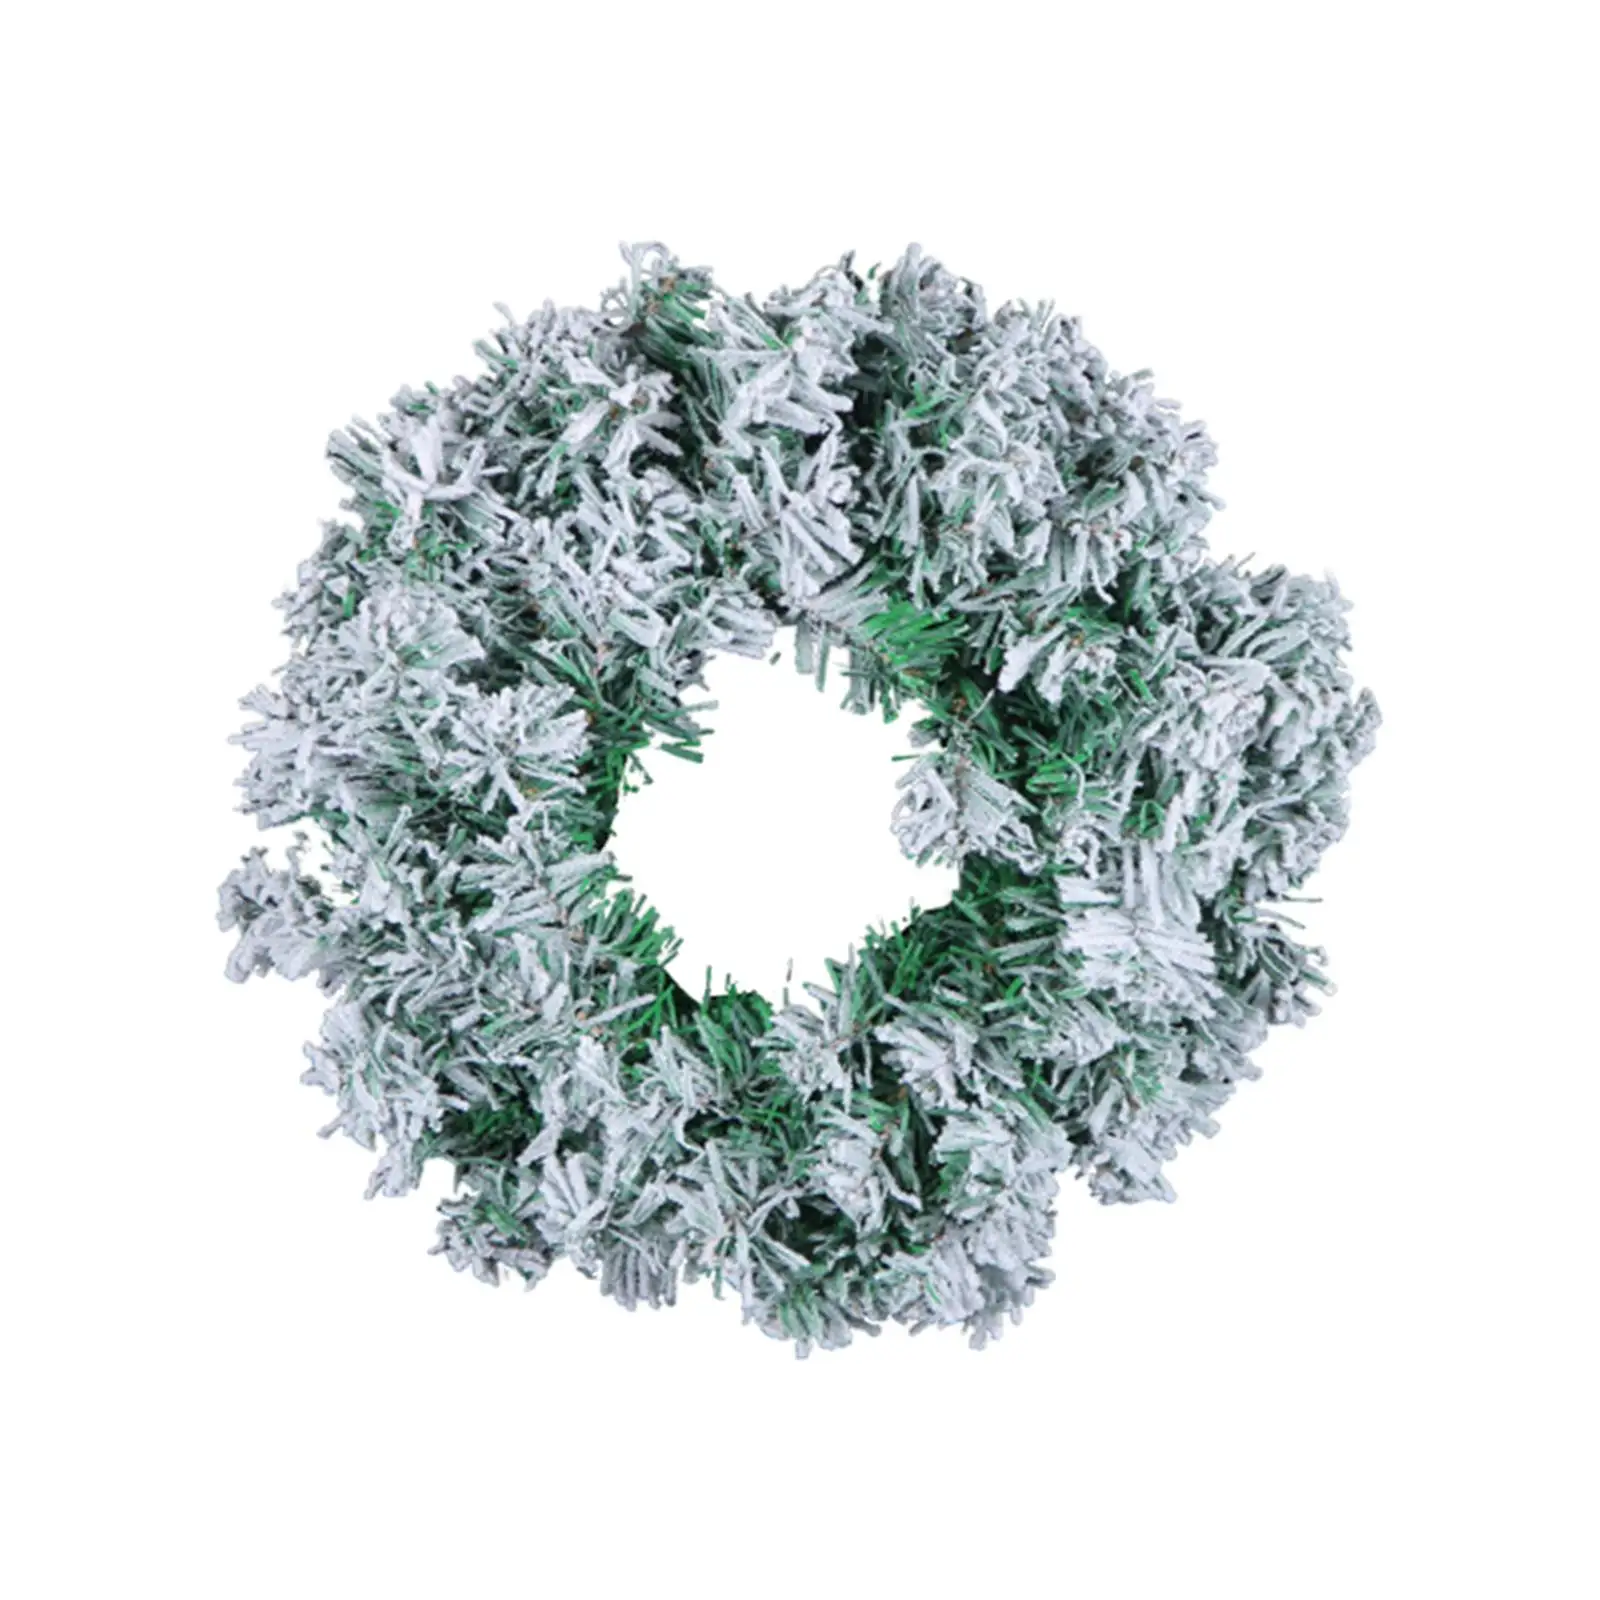 Artificial Snowy Christmas Wreath Decorative Xmas Decor Hanging Ornament Front Door Wreath for Wall Home Party Window House